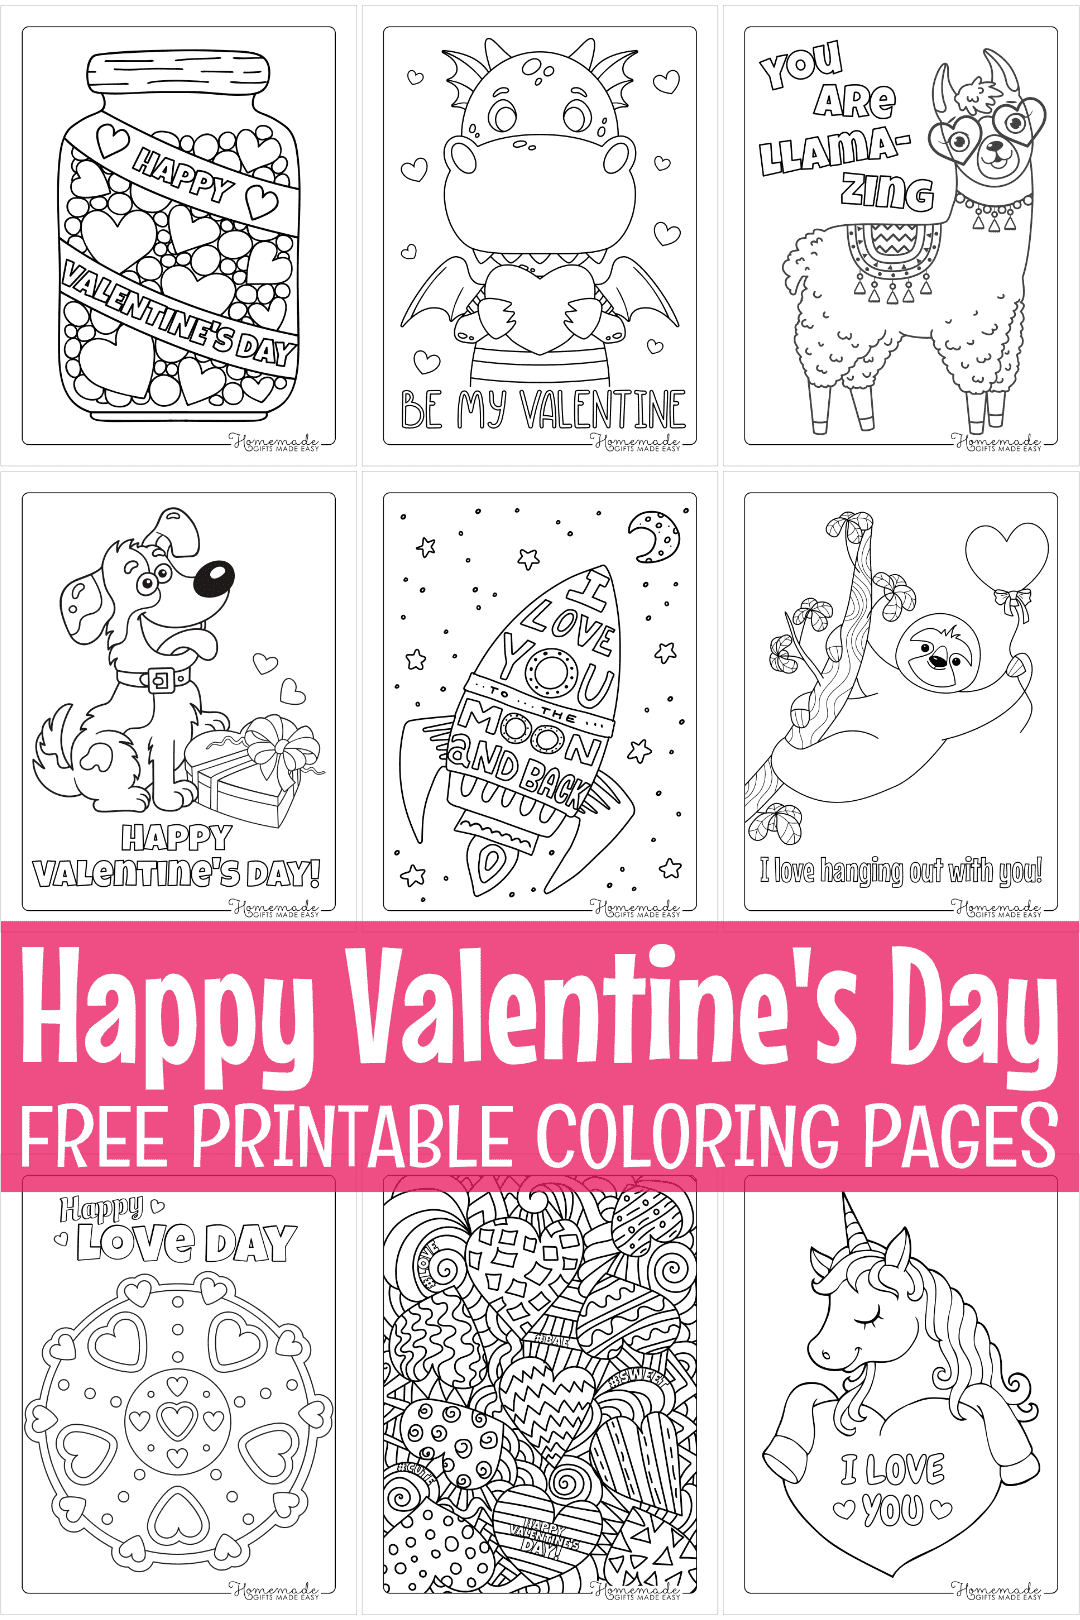 Free Printable Valentine's Day Word Search Puzzles